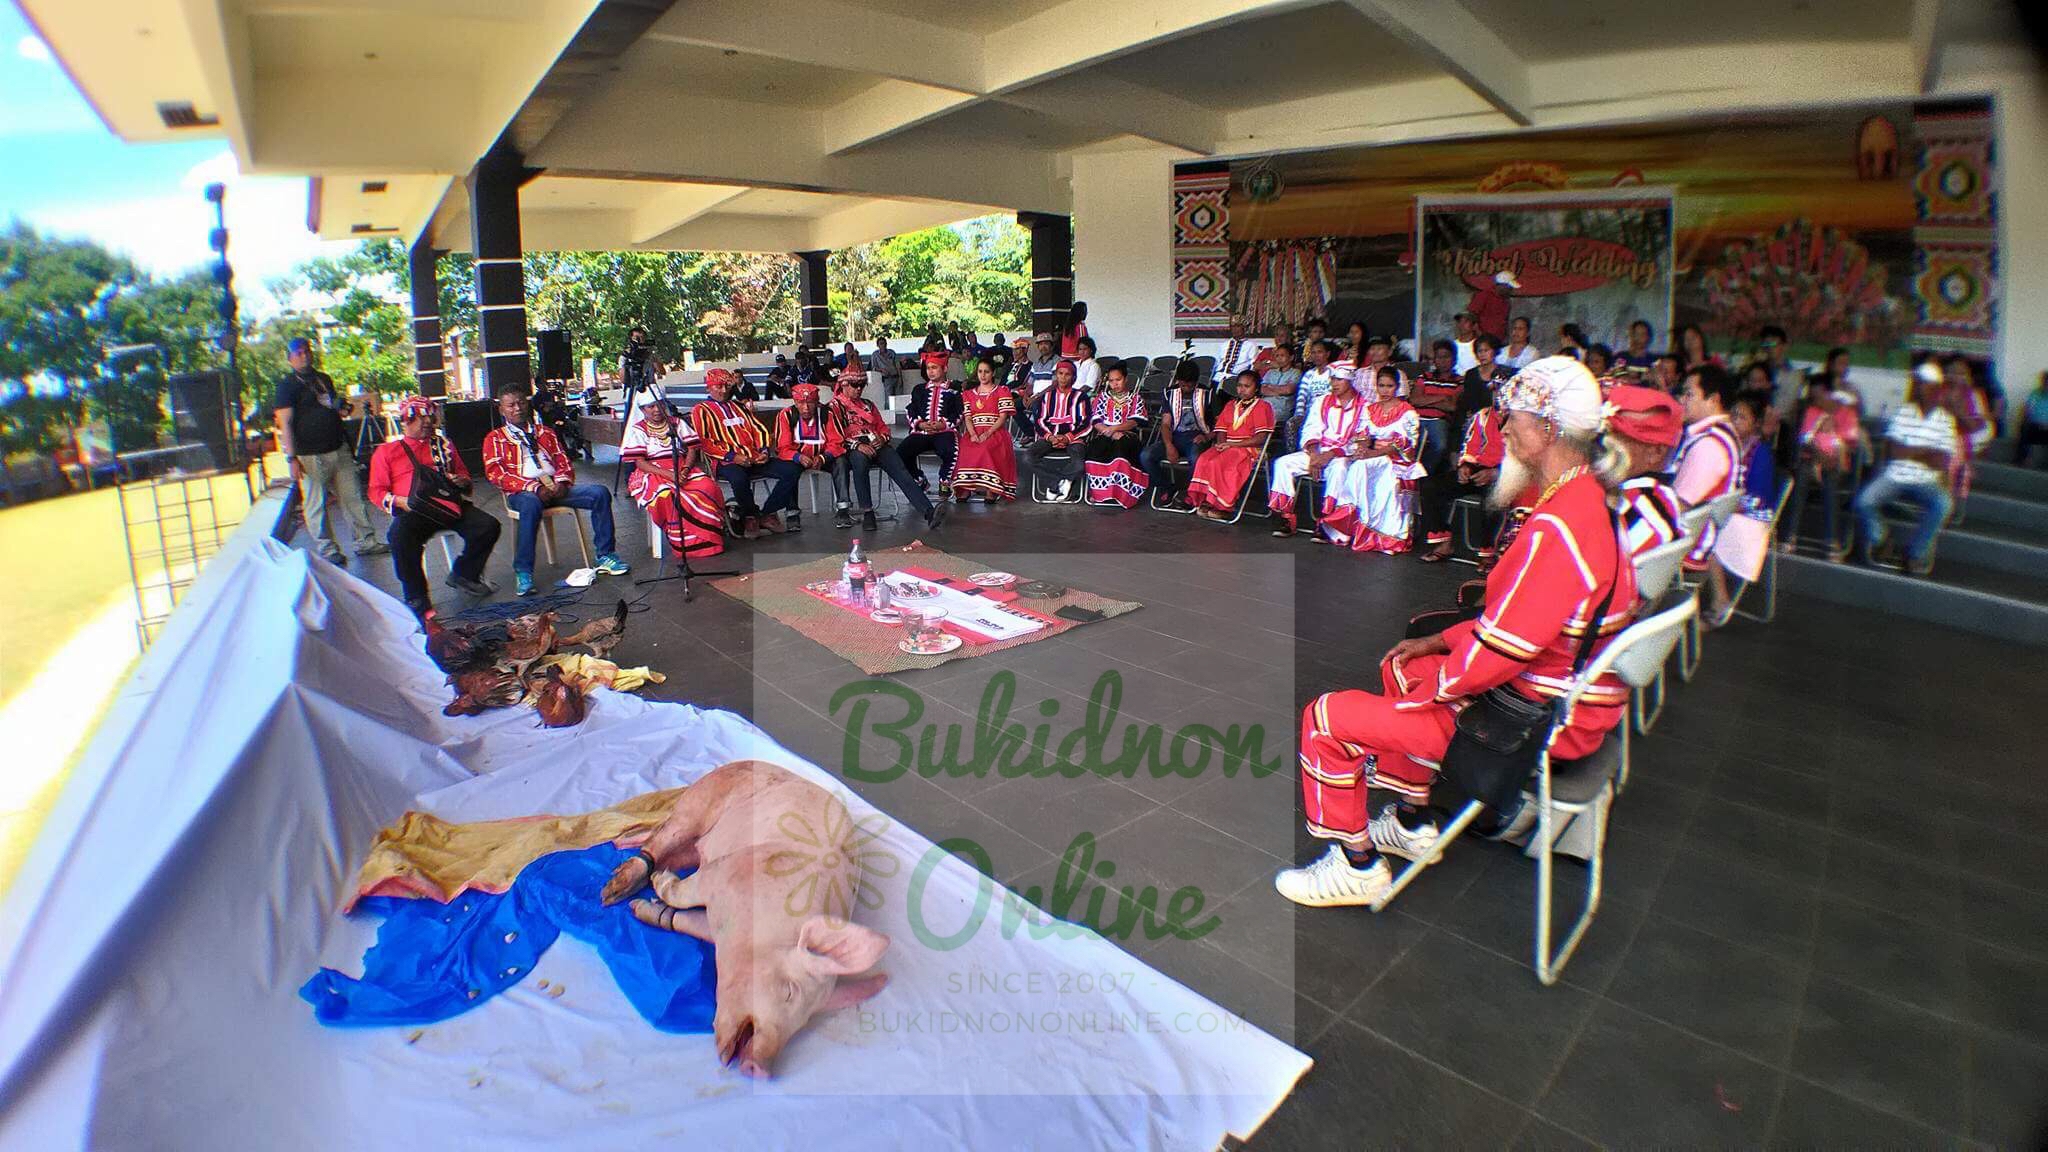 Fifty indigenous families to be affected by Bukidnon airport project